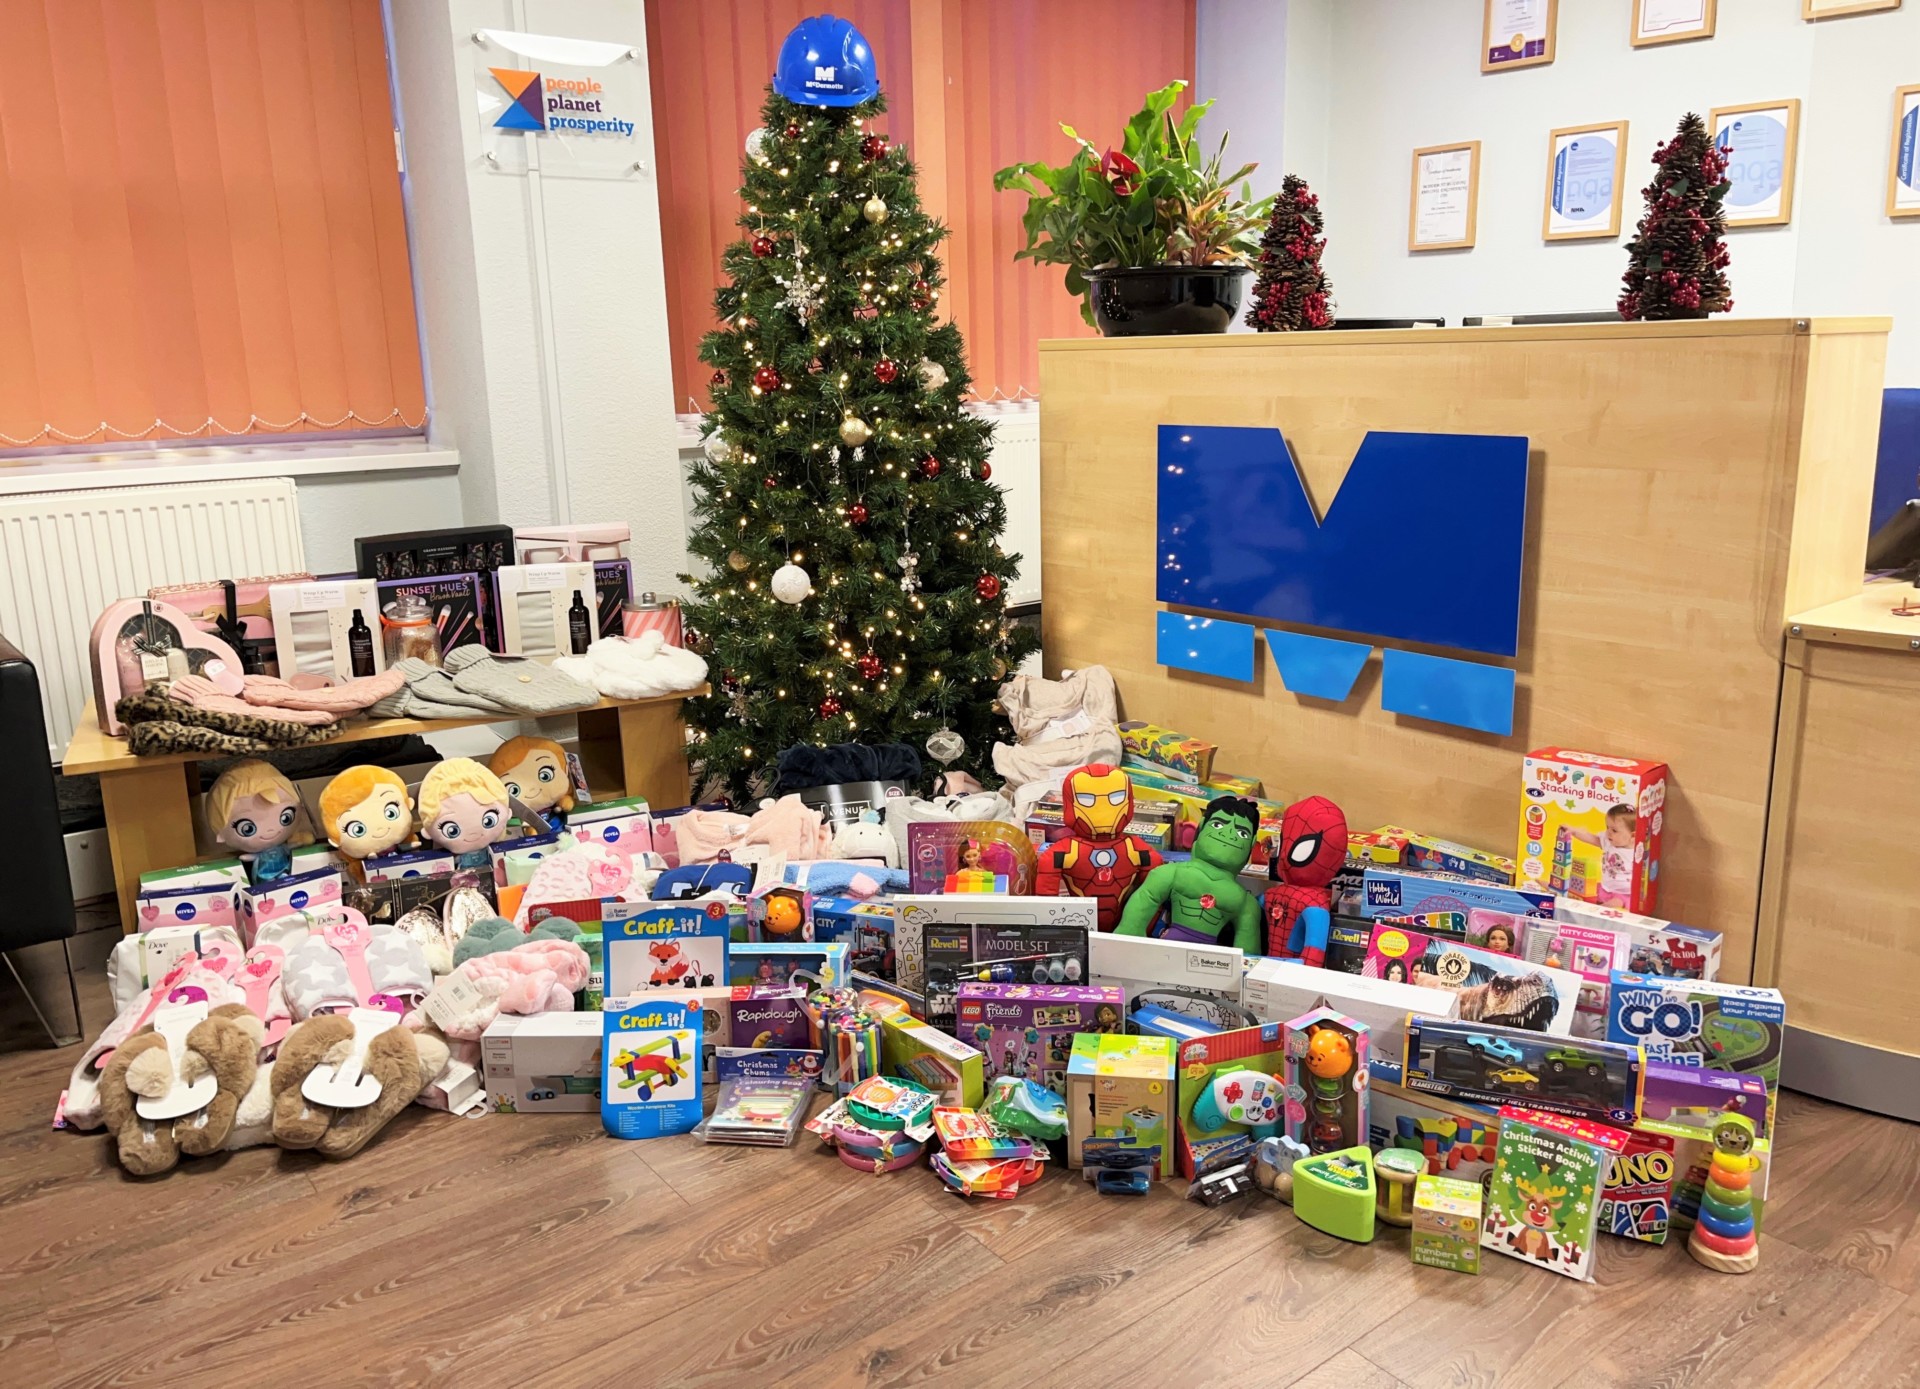 McDermotts staff donate over 200 gifts to families who are within refuges and the local community.